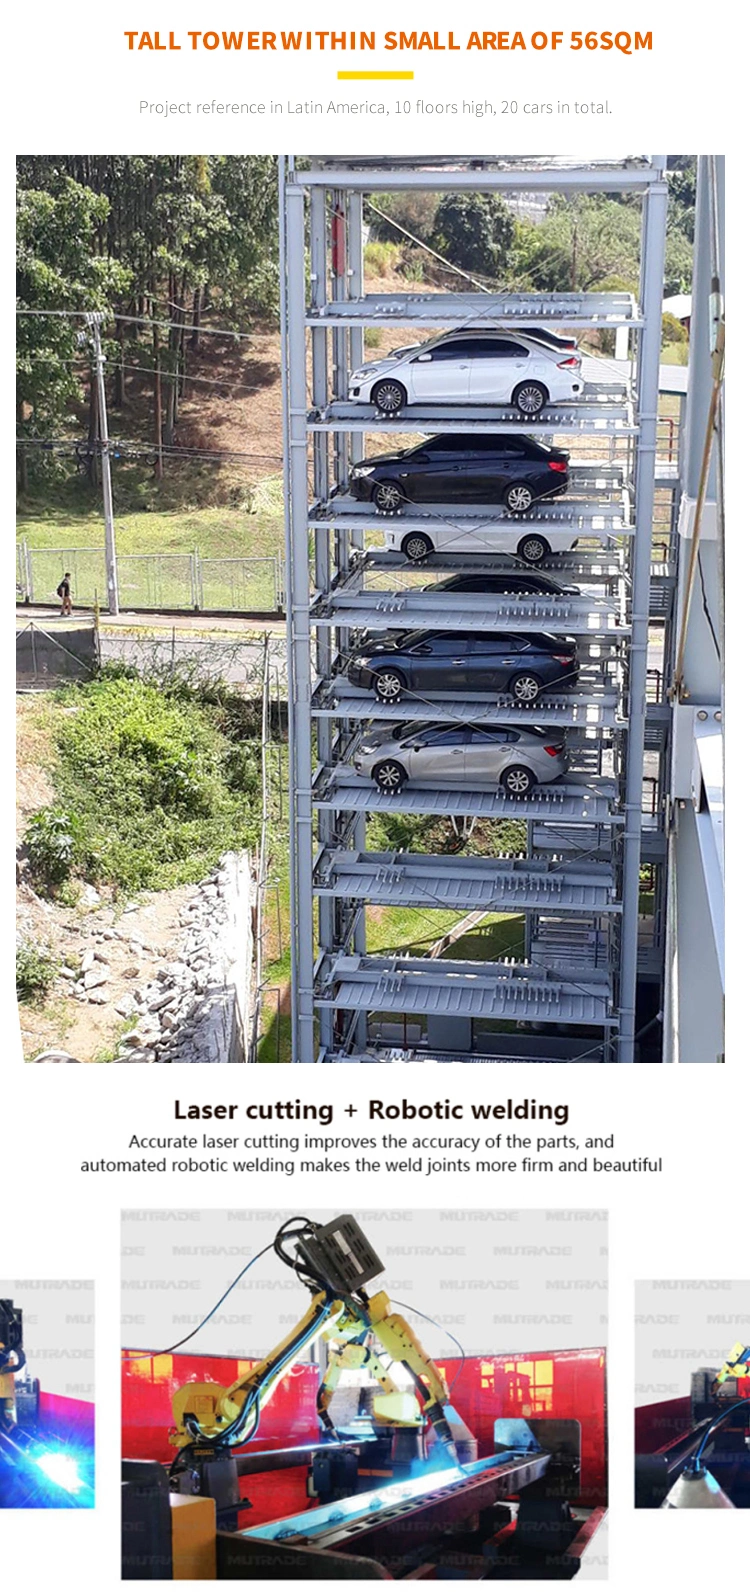 Multi-Level Automated Tower Parking System